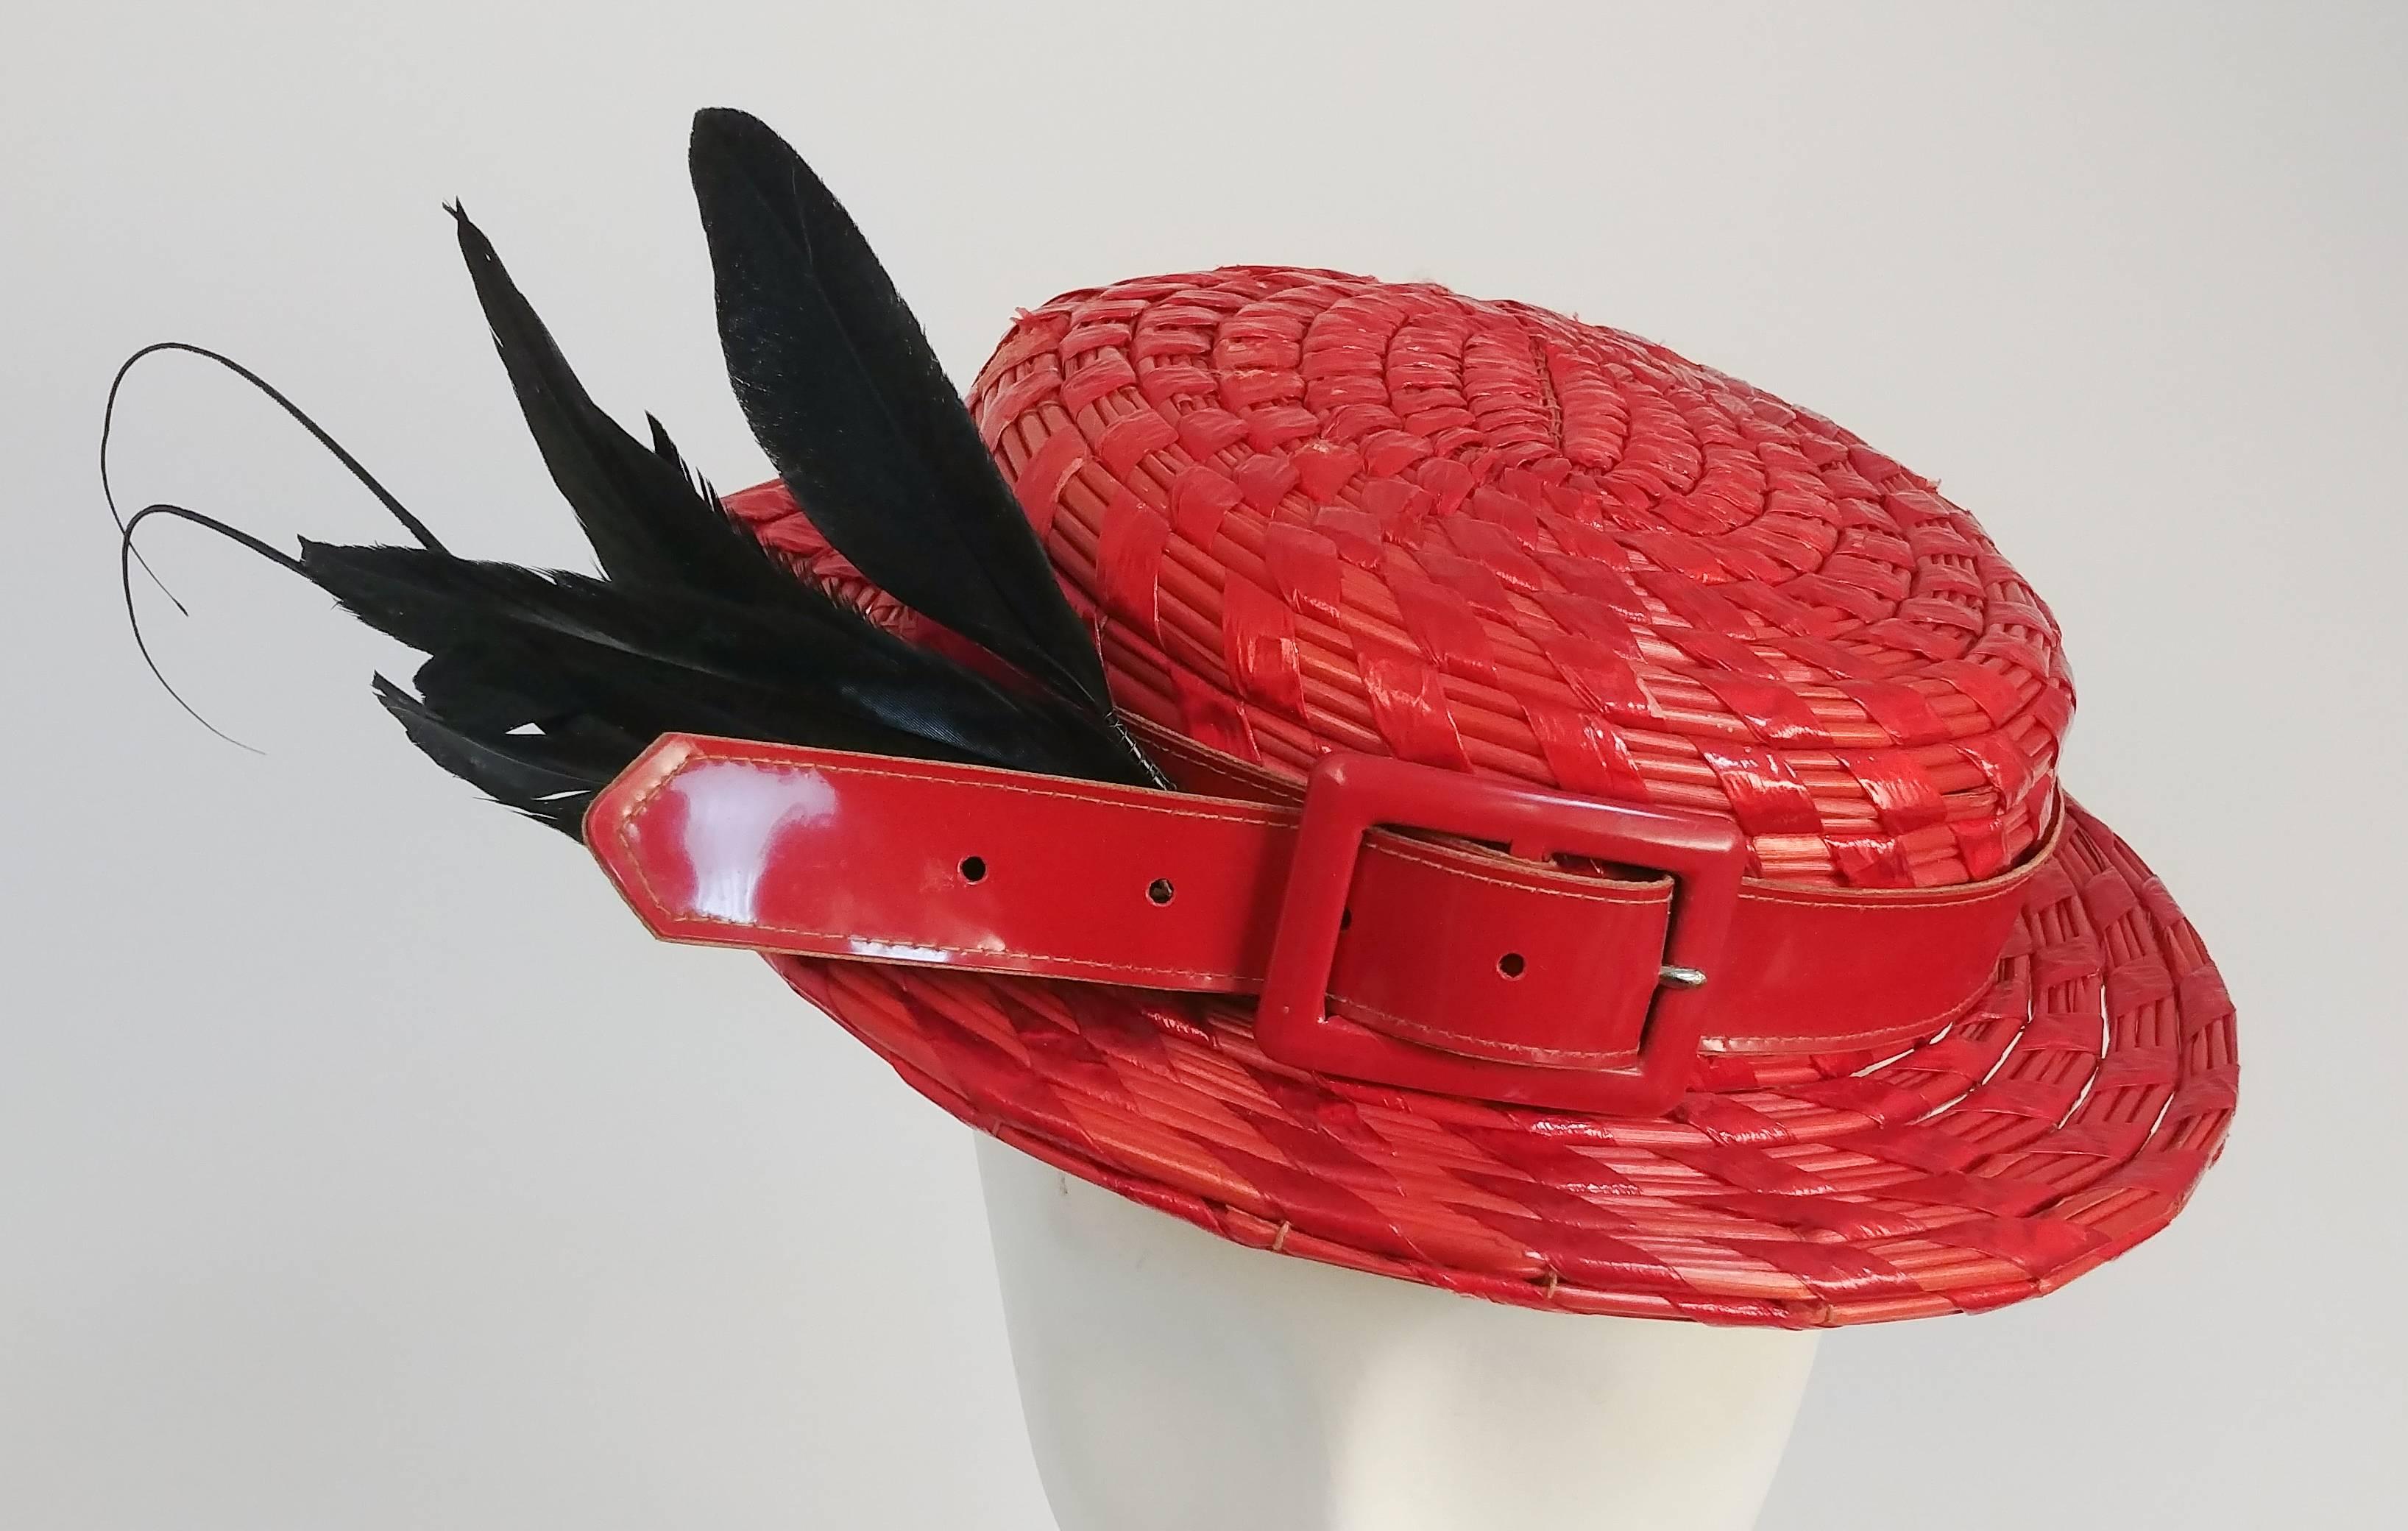 1950s Red Hat with Patent Leather Hatband & Feathers. Red woven hat featuring red patent leather belt as hatband and black feathers cocked towards one side. Held to back of head with elastic.